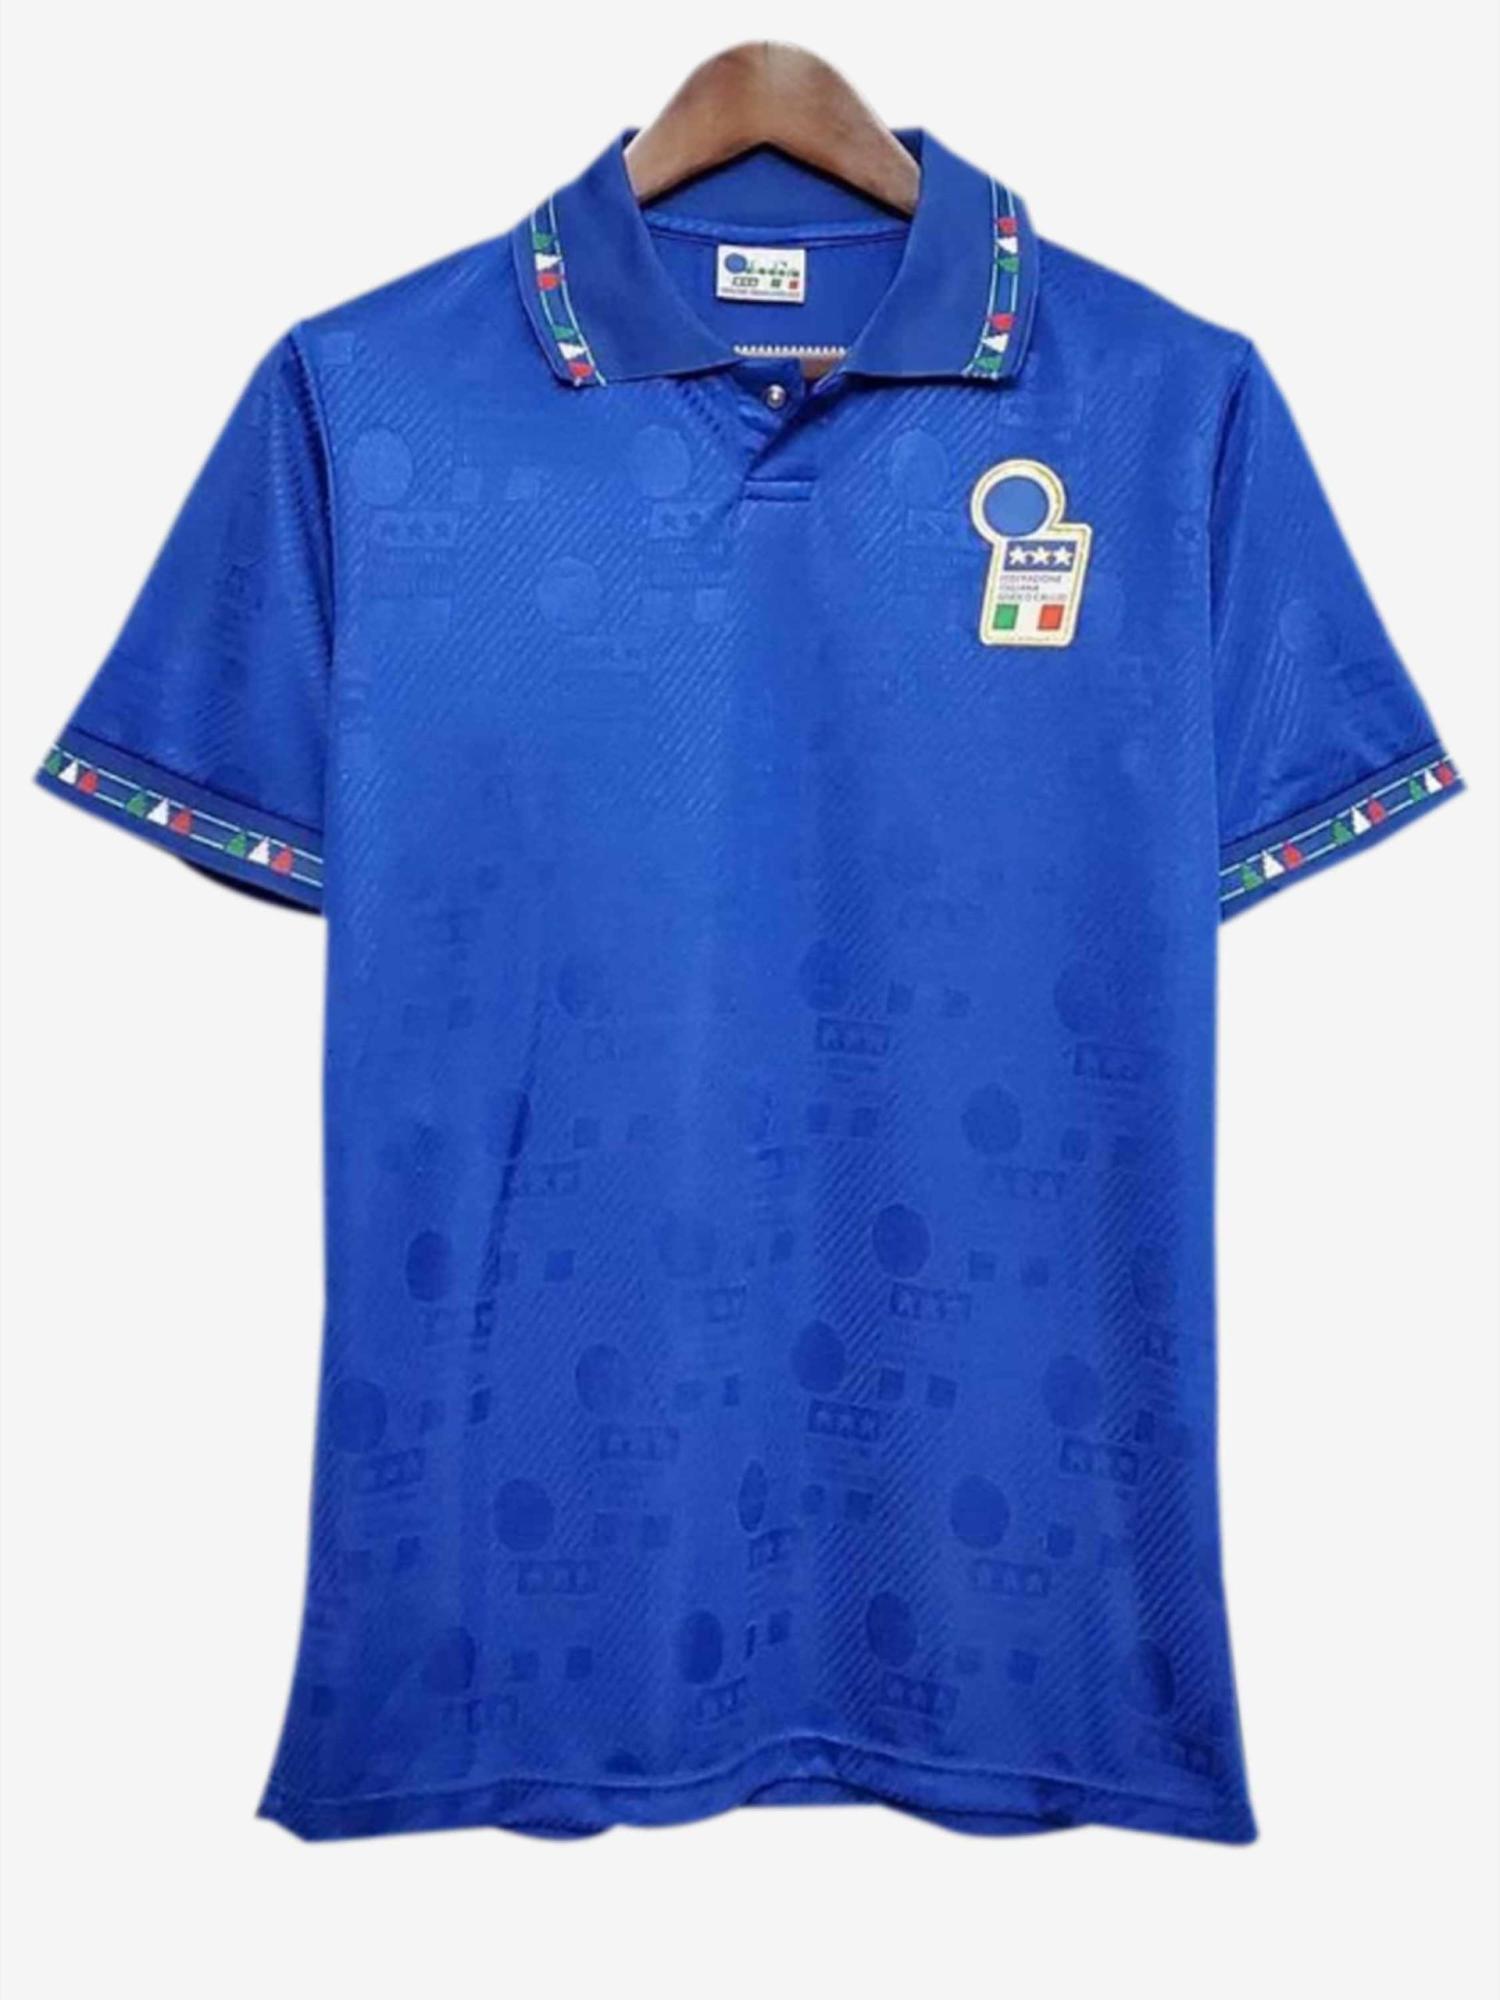 Italy-Home-1994-World-Cup-Retro-Jersey